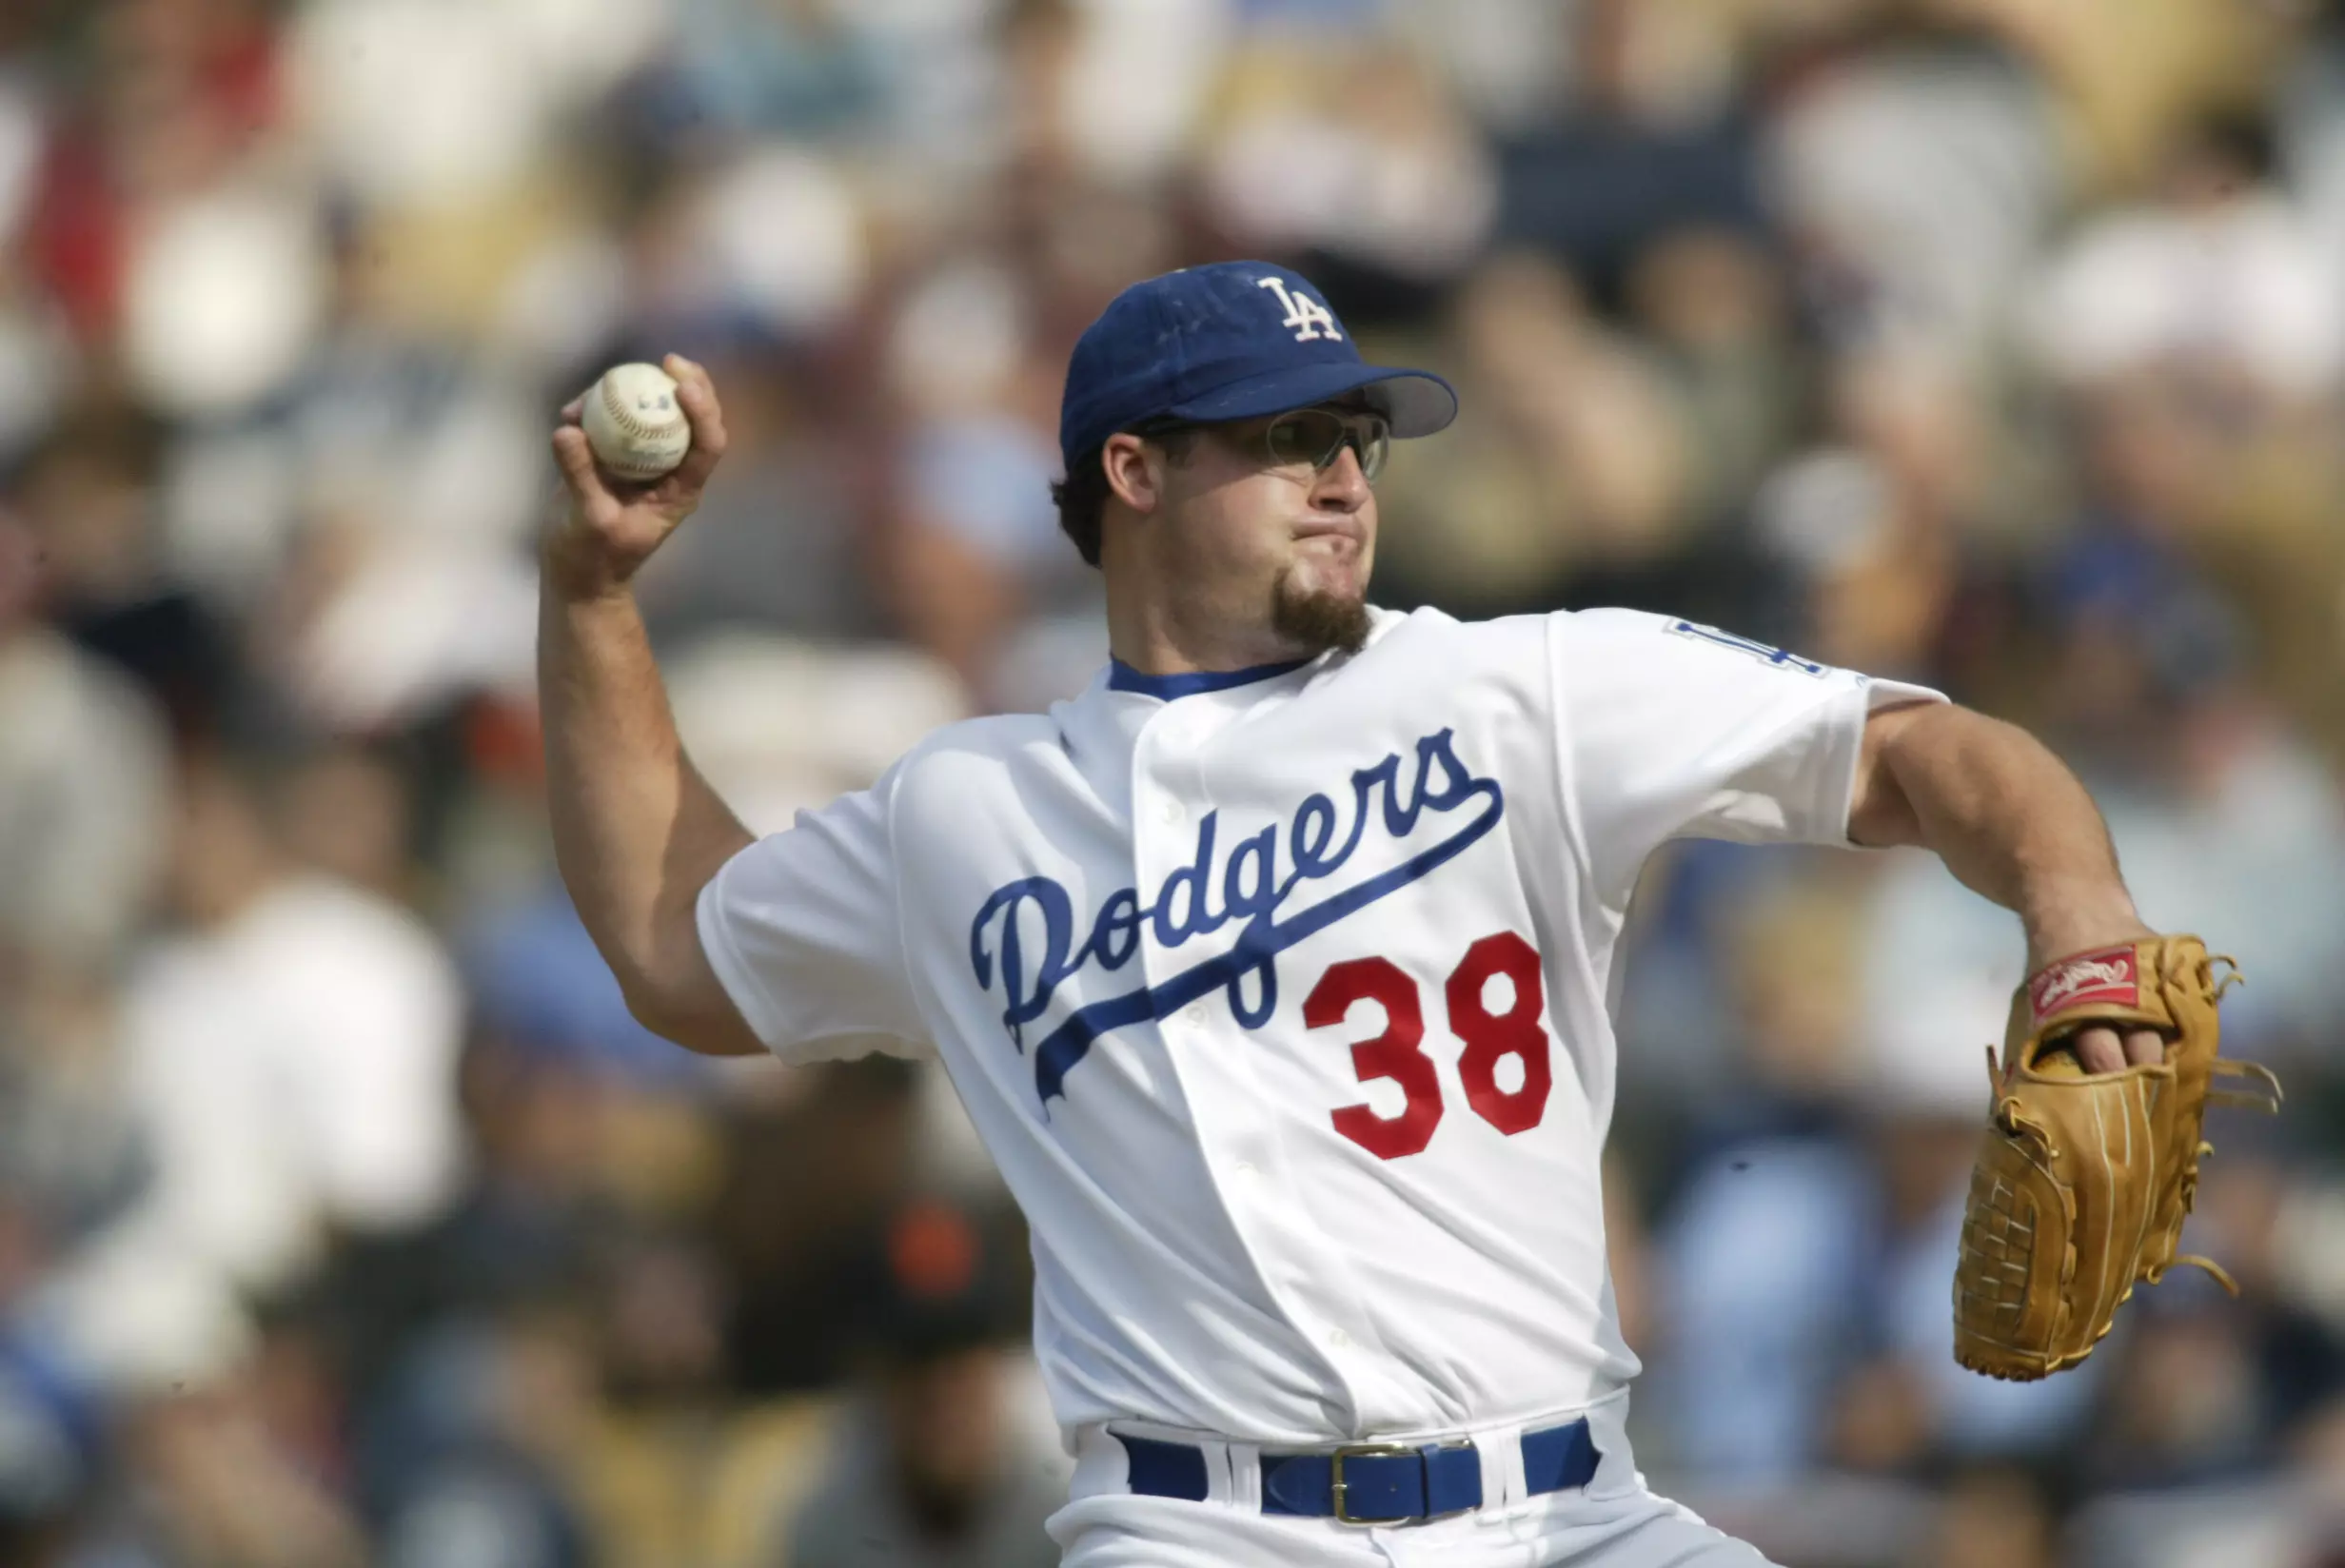 Eric Gagne on being a closer, 02/17/2022